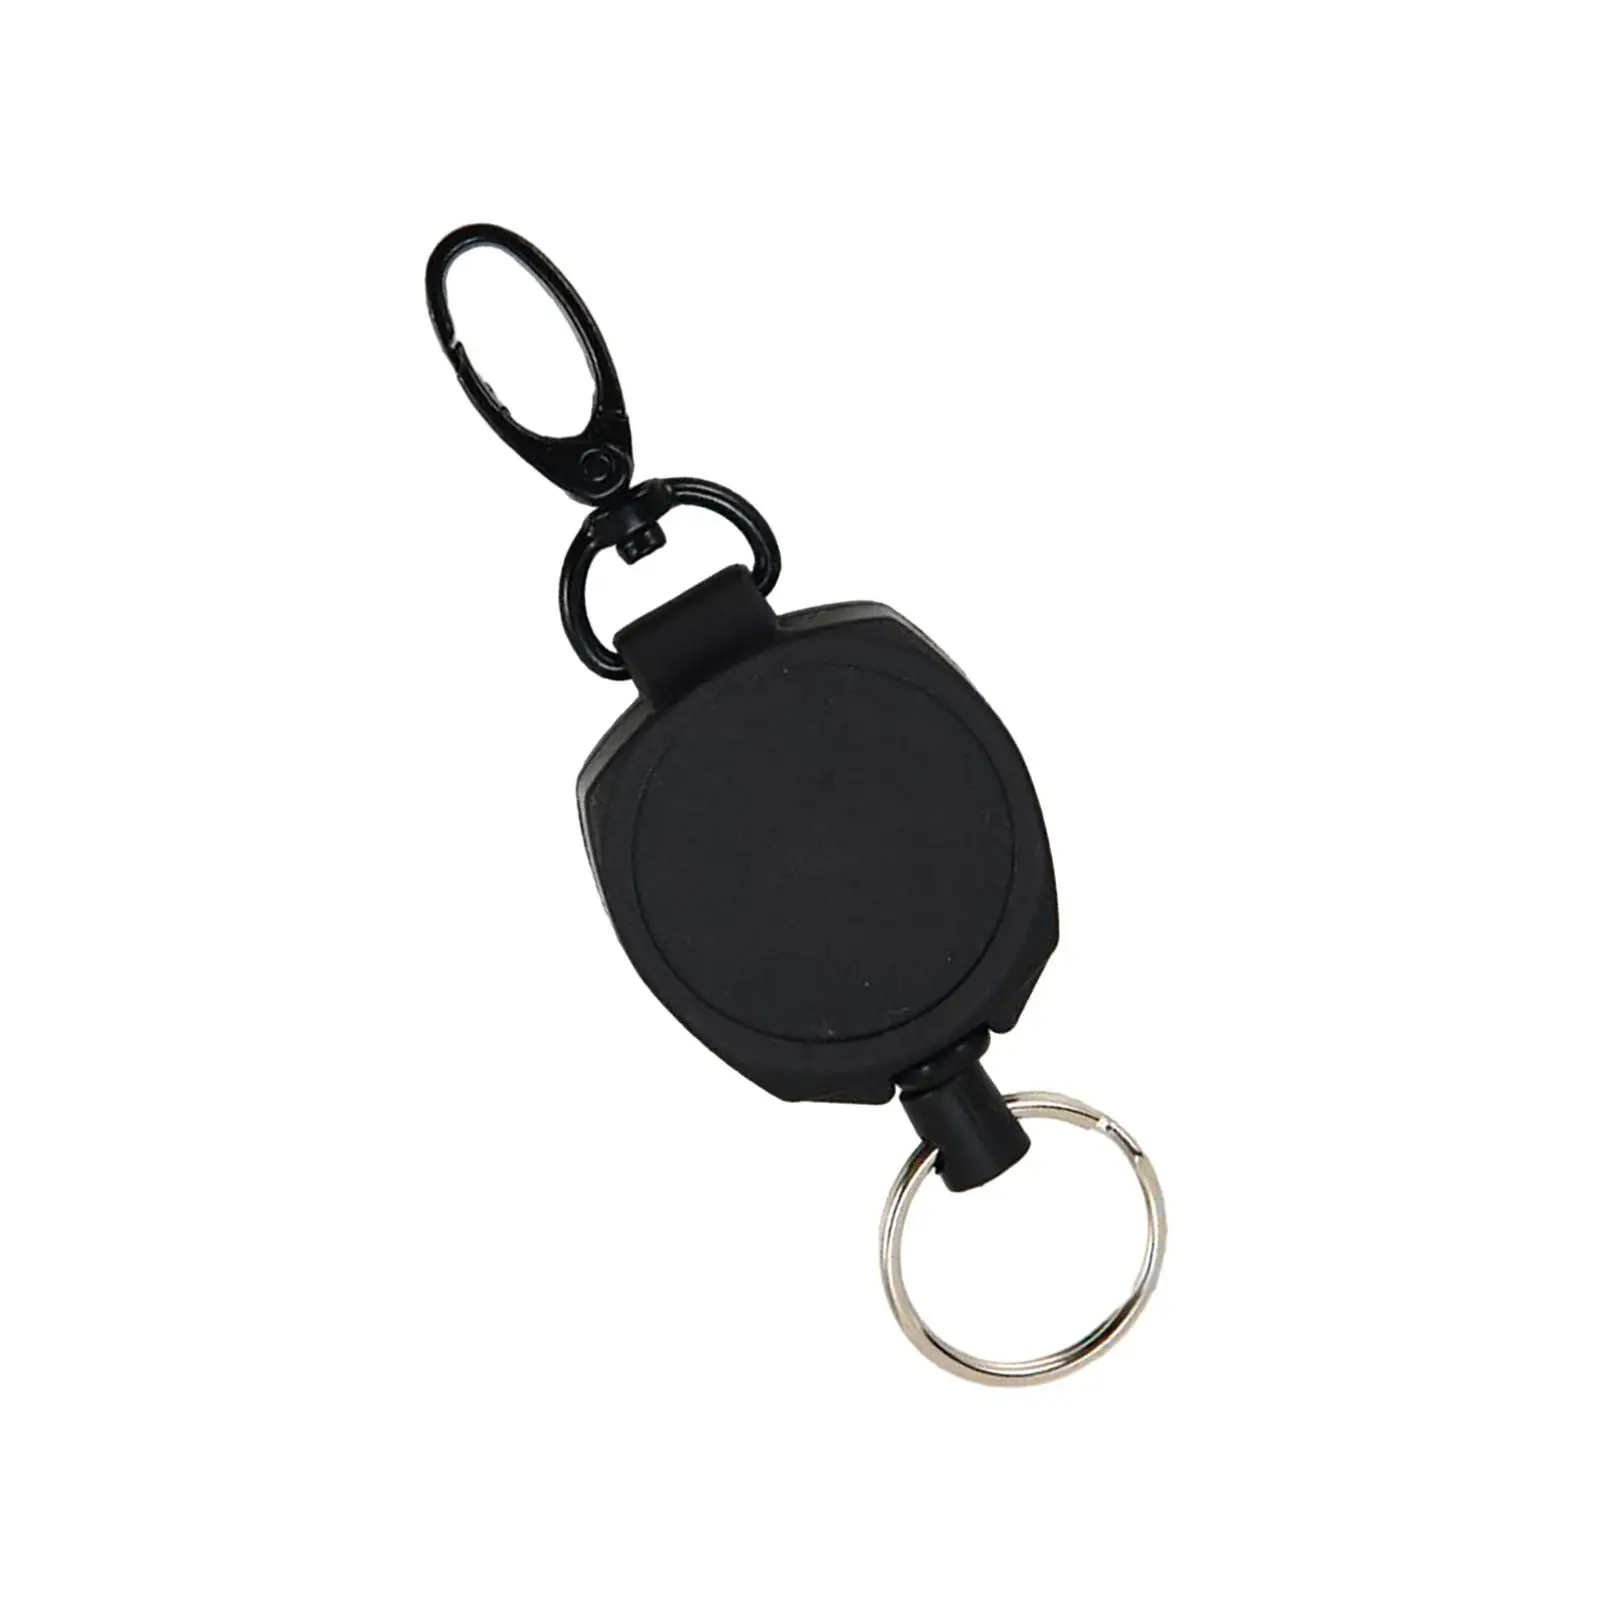 Retractable Keychain Heavy Duty Carabiner and Key Reel Durable with 23.62`` Nylon Cable for Outdoor Activities Men Women Camping